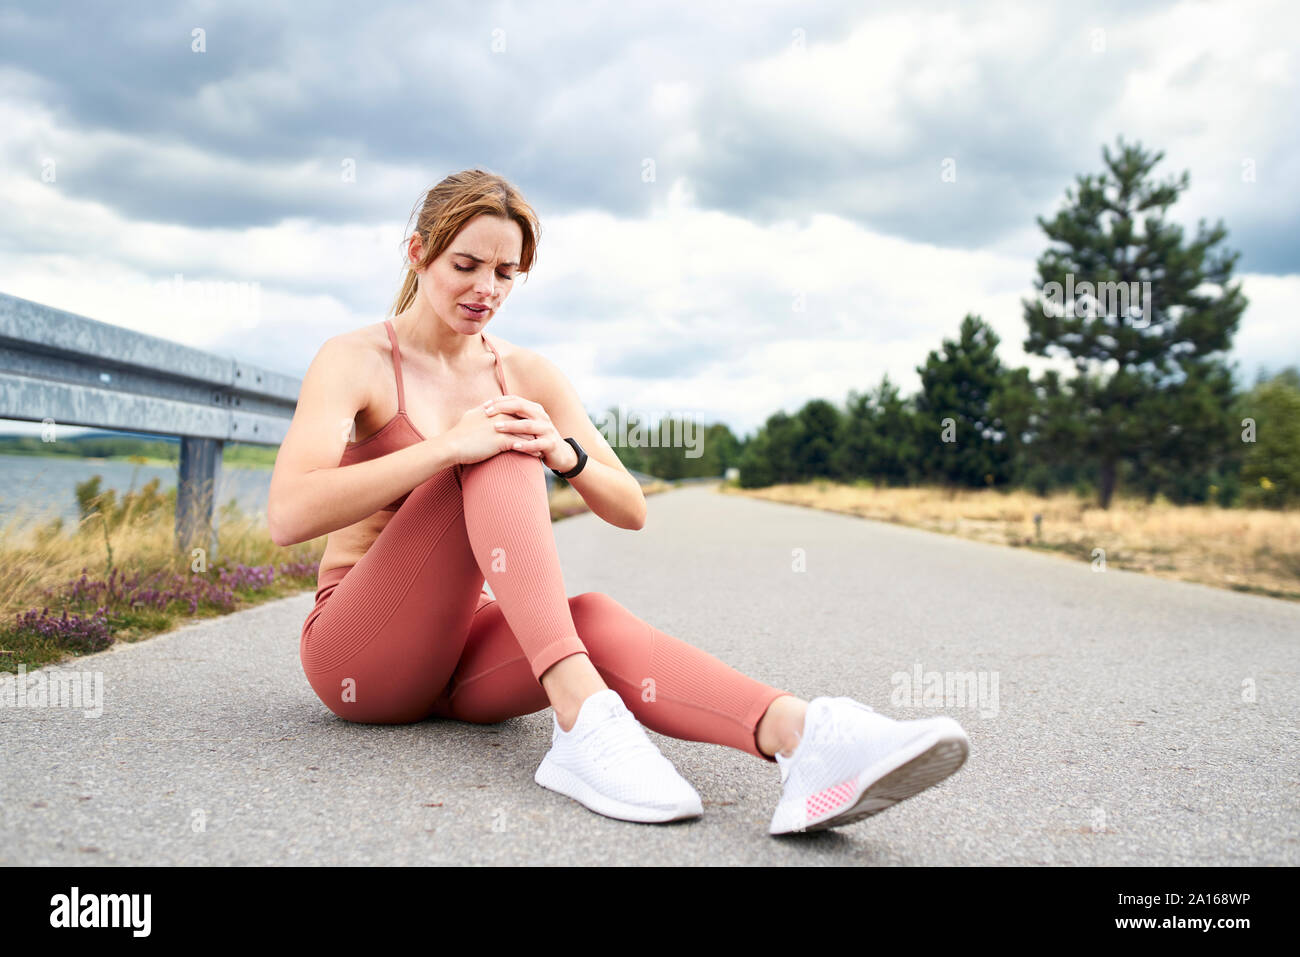 Woman sitting on ground and holding knee after injury during workout Stock Photo